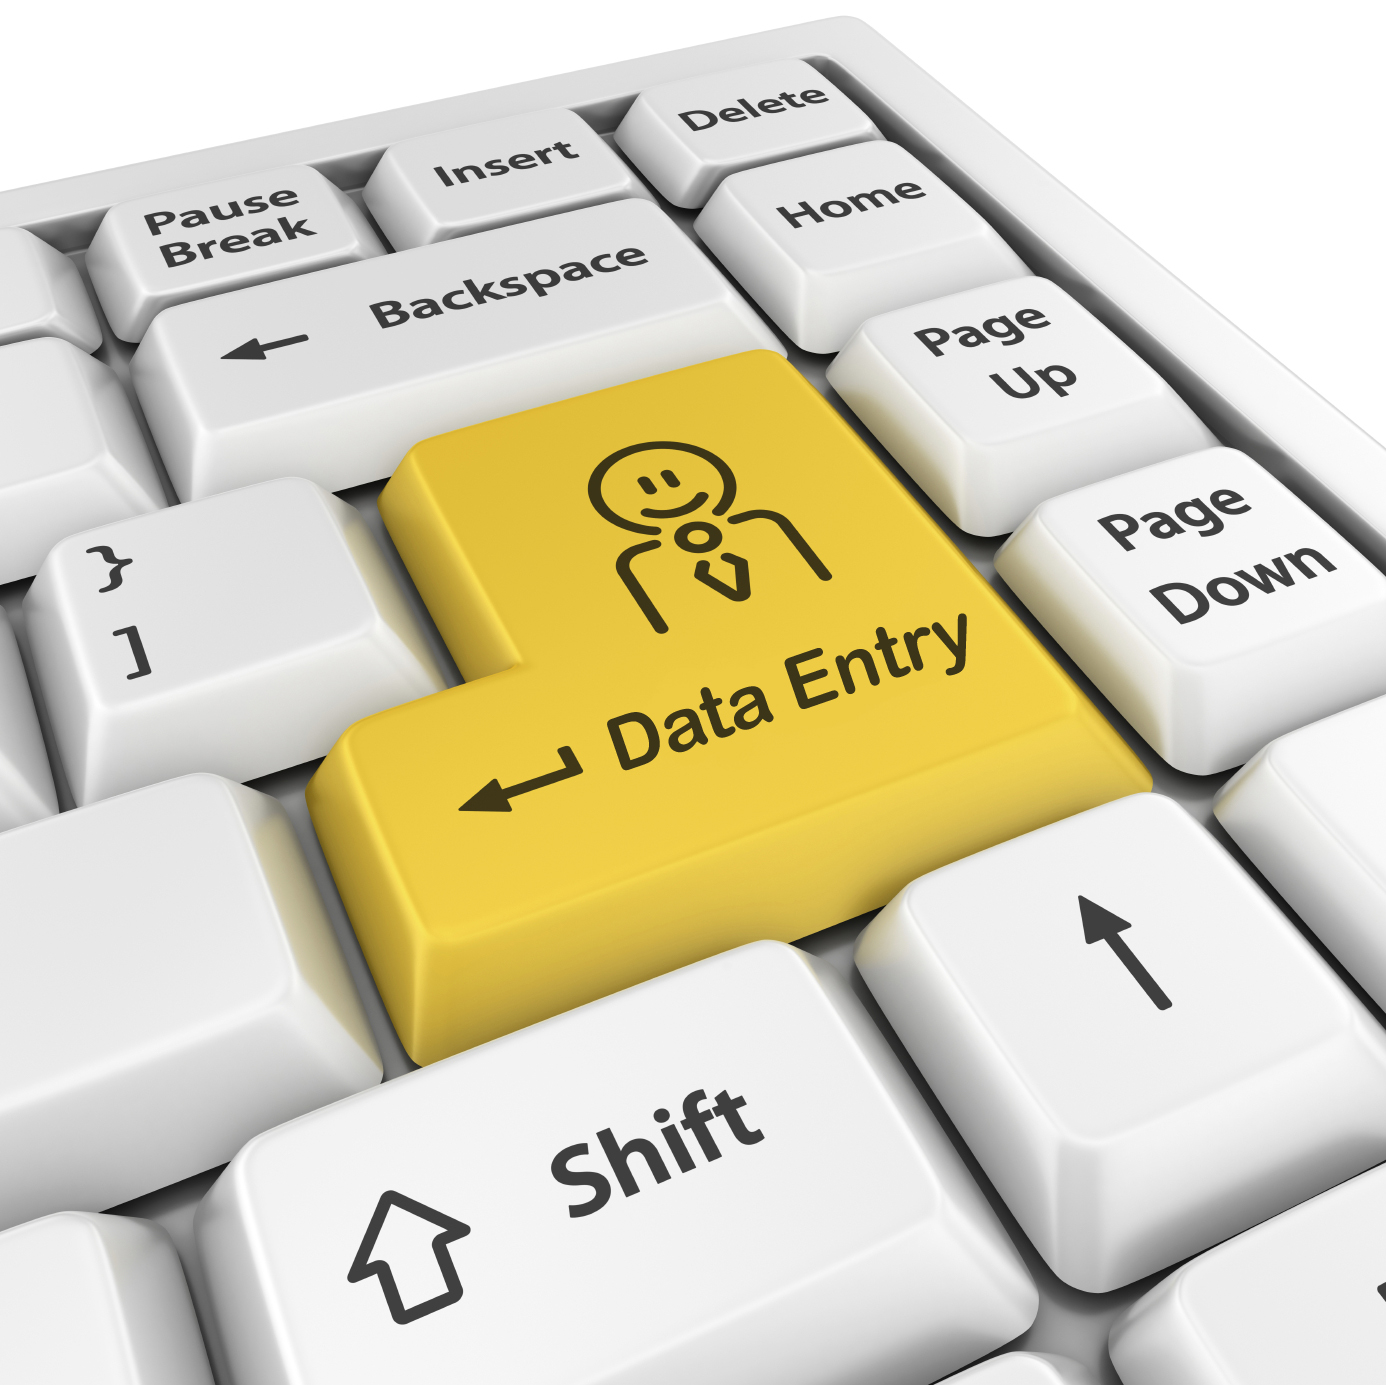 Do any kind of data entry work for 2 hour